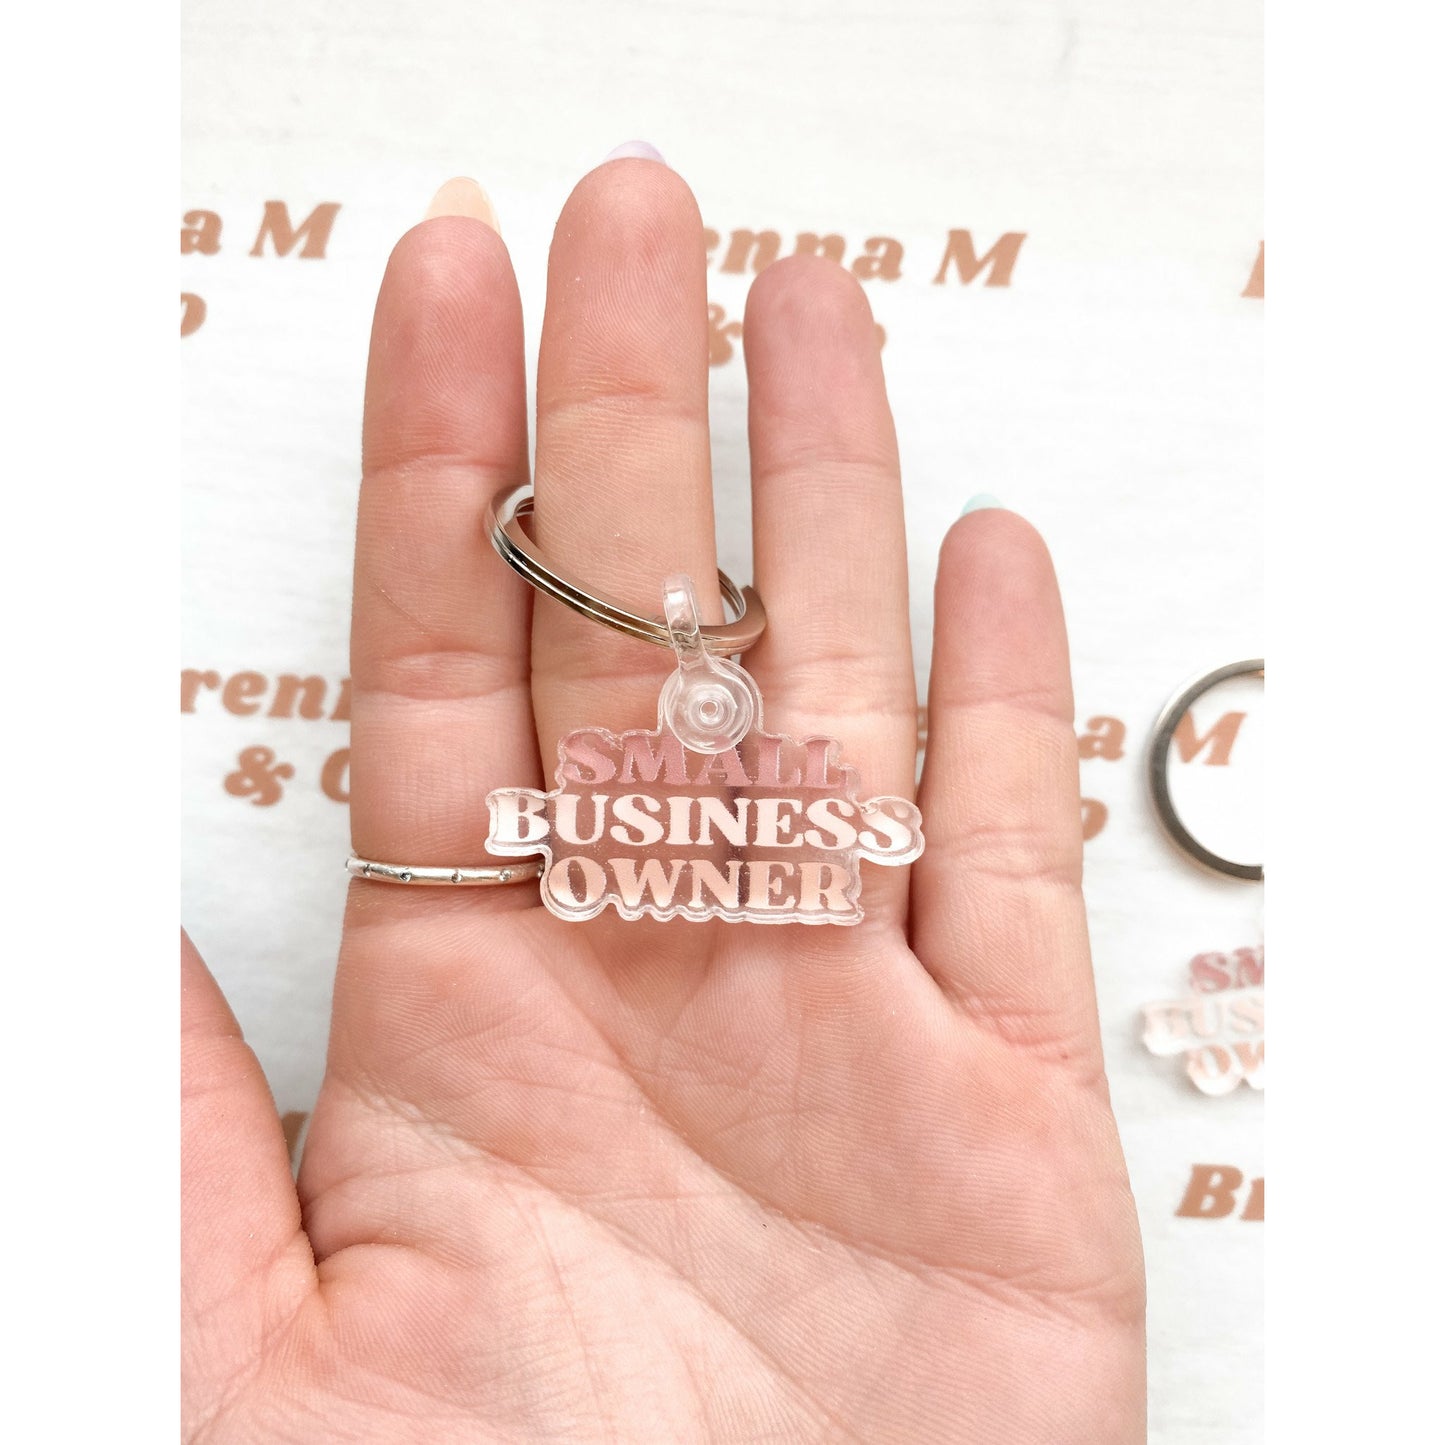 Mini Small Business Owner Keychain